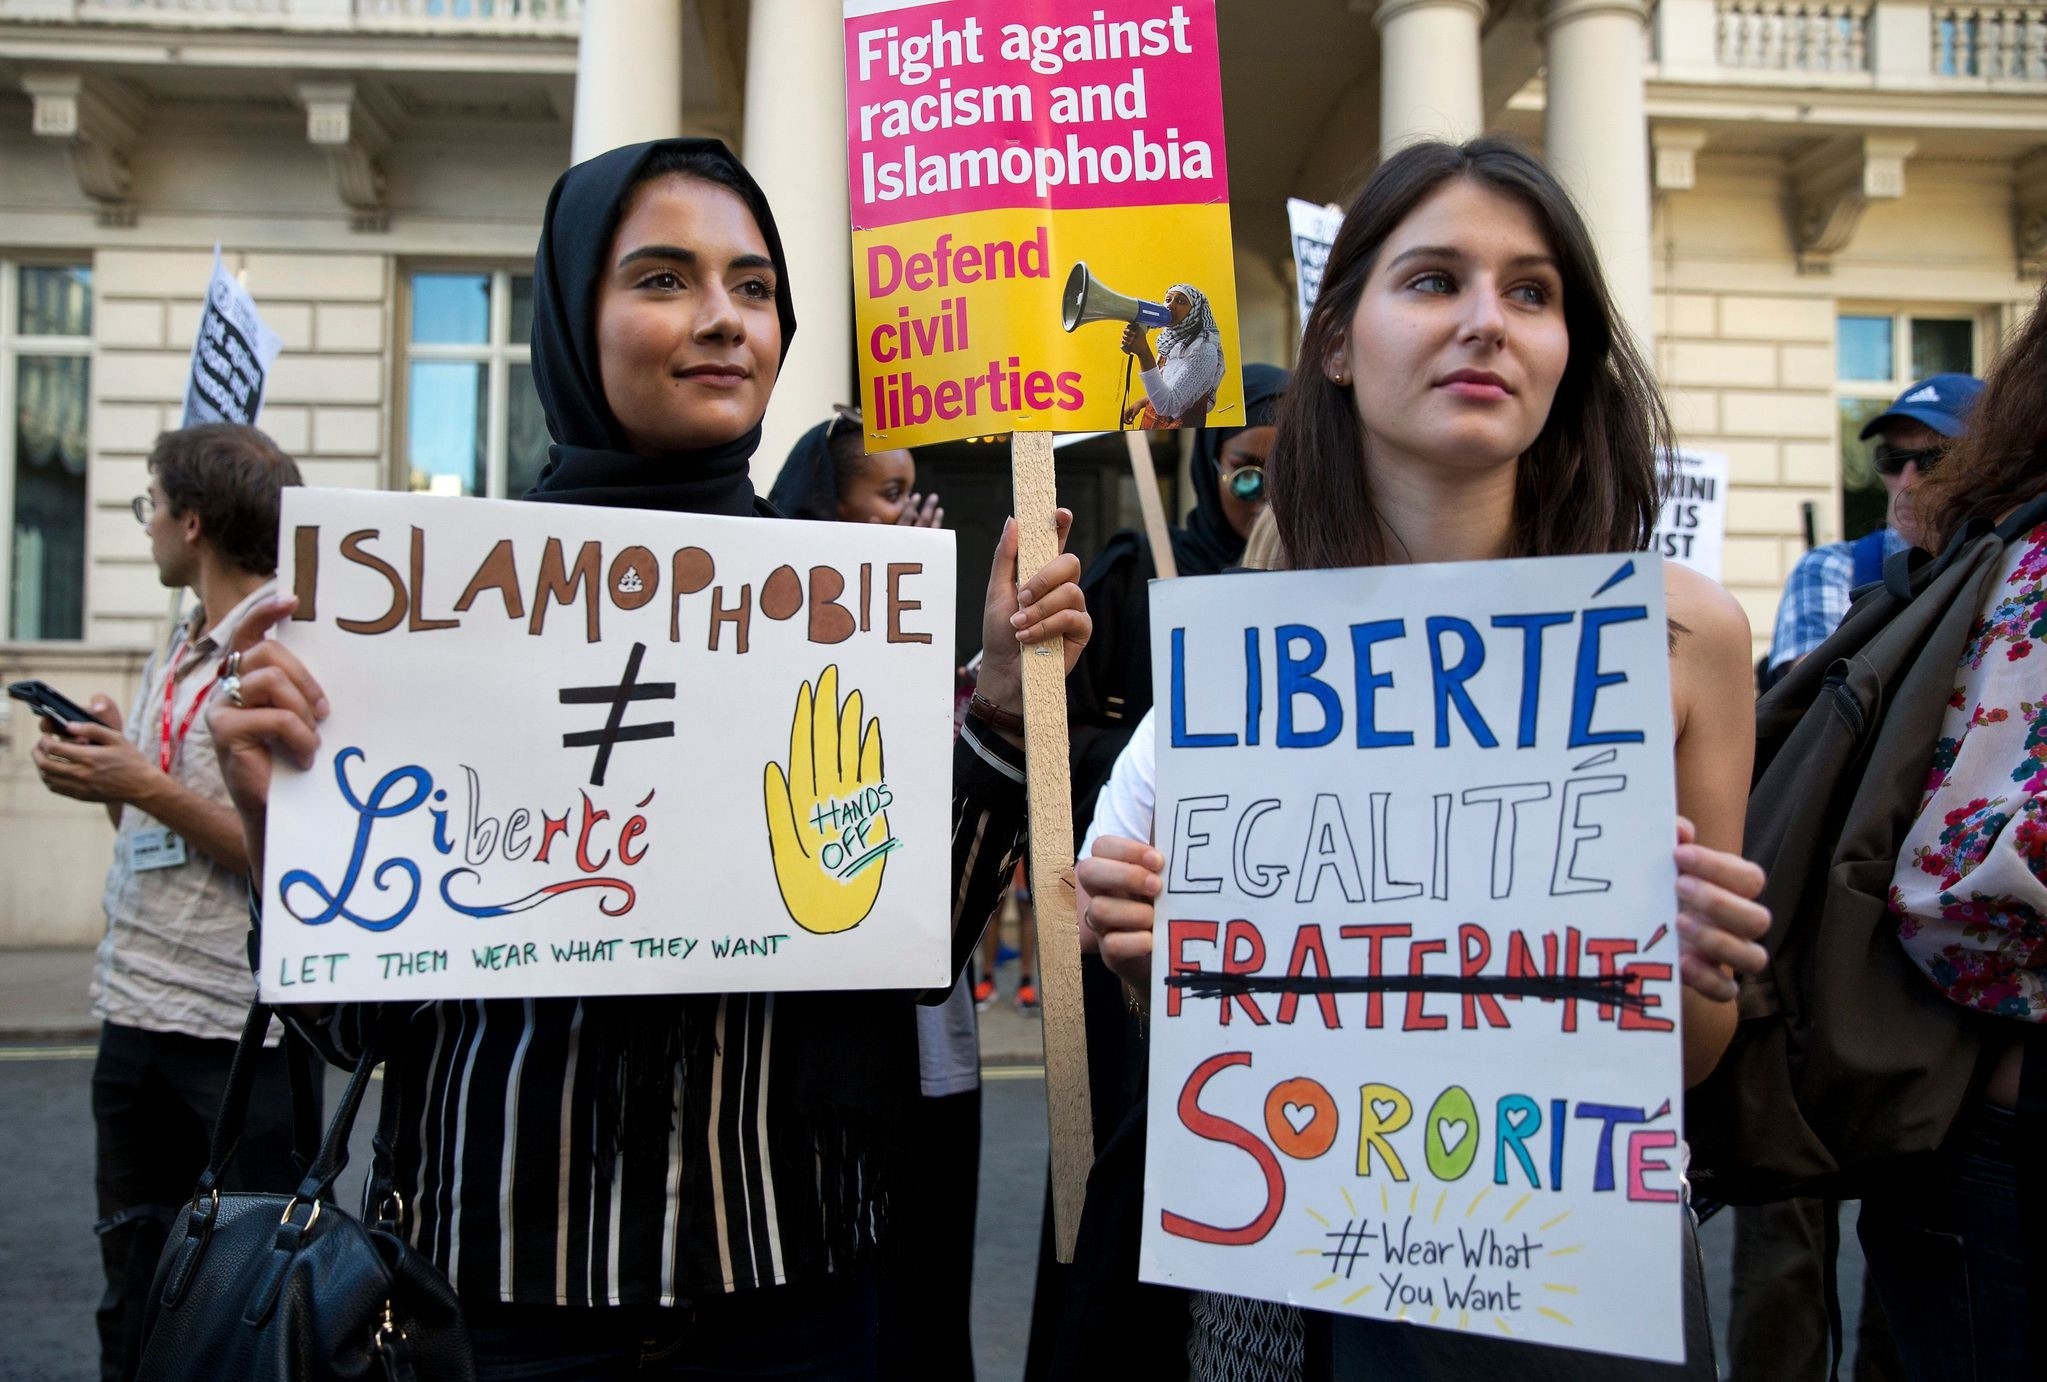 Women joining a demonstration organised by ,Stand up to Racism, outside the French Embassy in London on Aug. 26, 2016 against the burkini ban on French beaches. (AFP Photo)